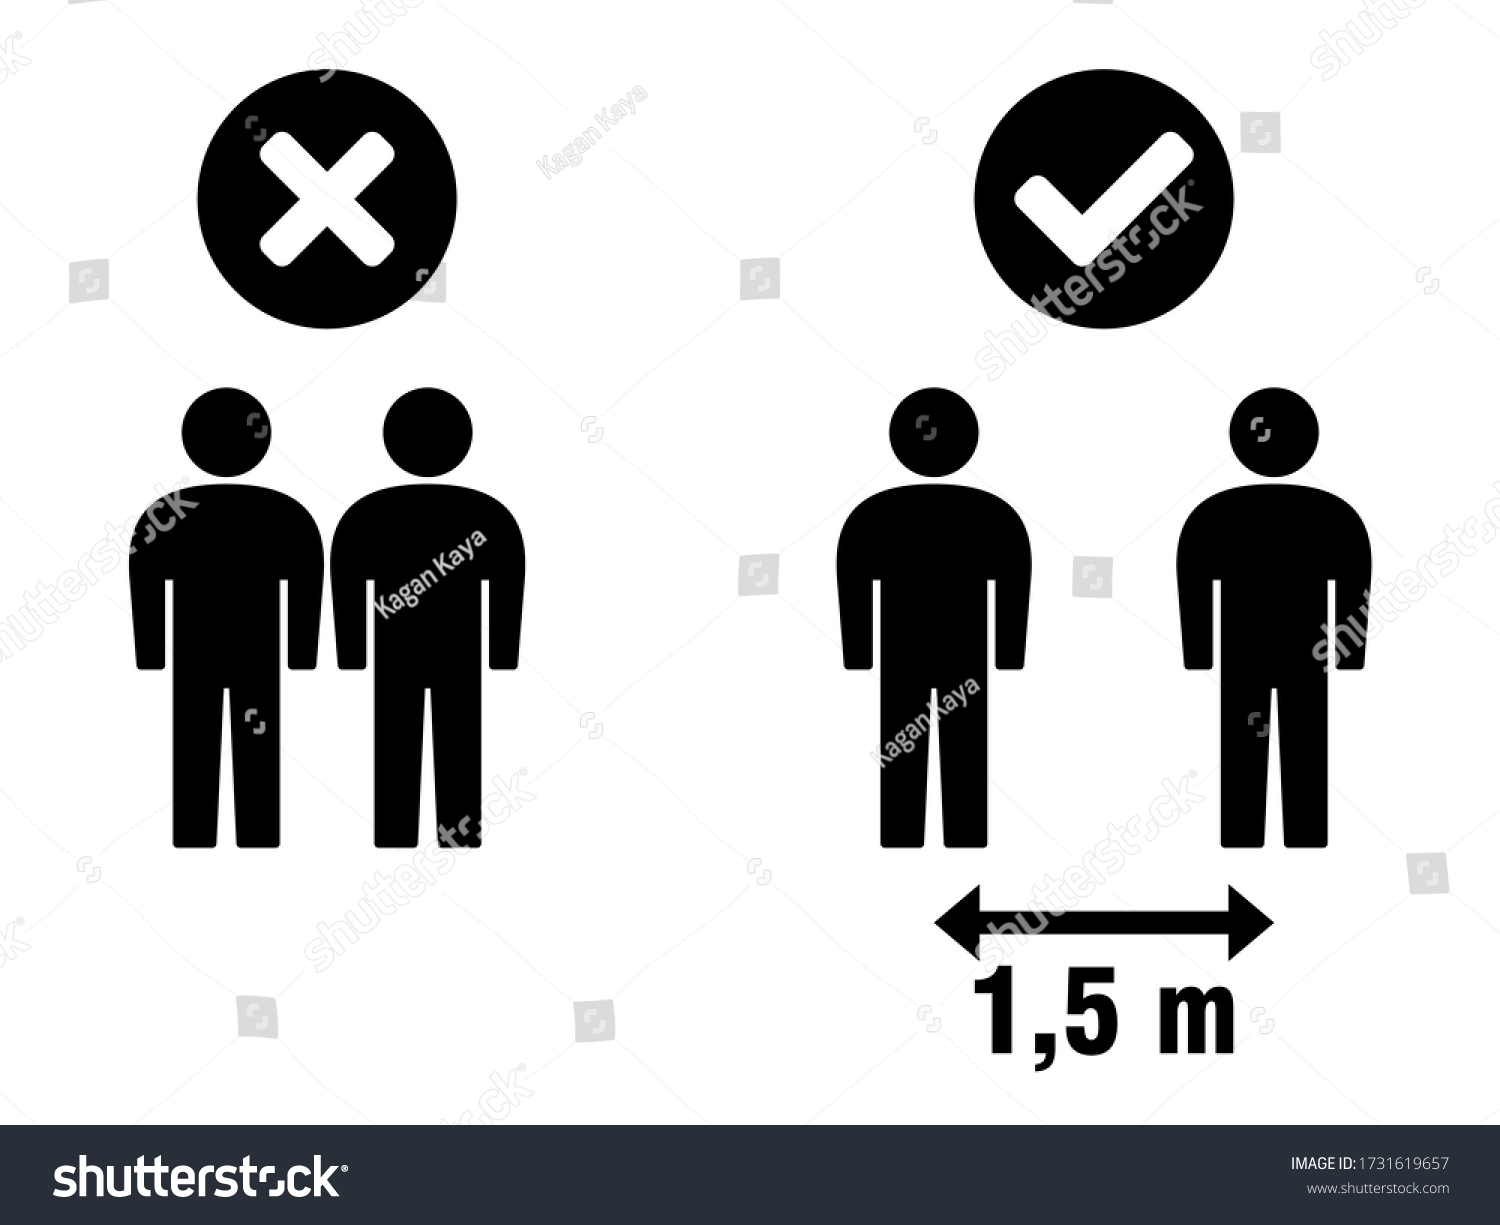 Social Distancing Keep Your Distance 1,5 m or 1,5 Metres Infographic Icon. Vector Image. #1731619657